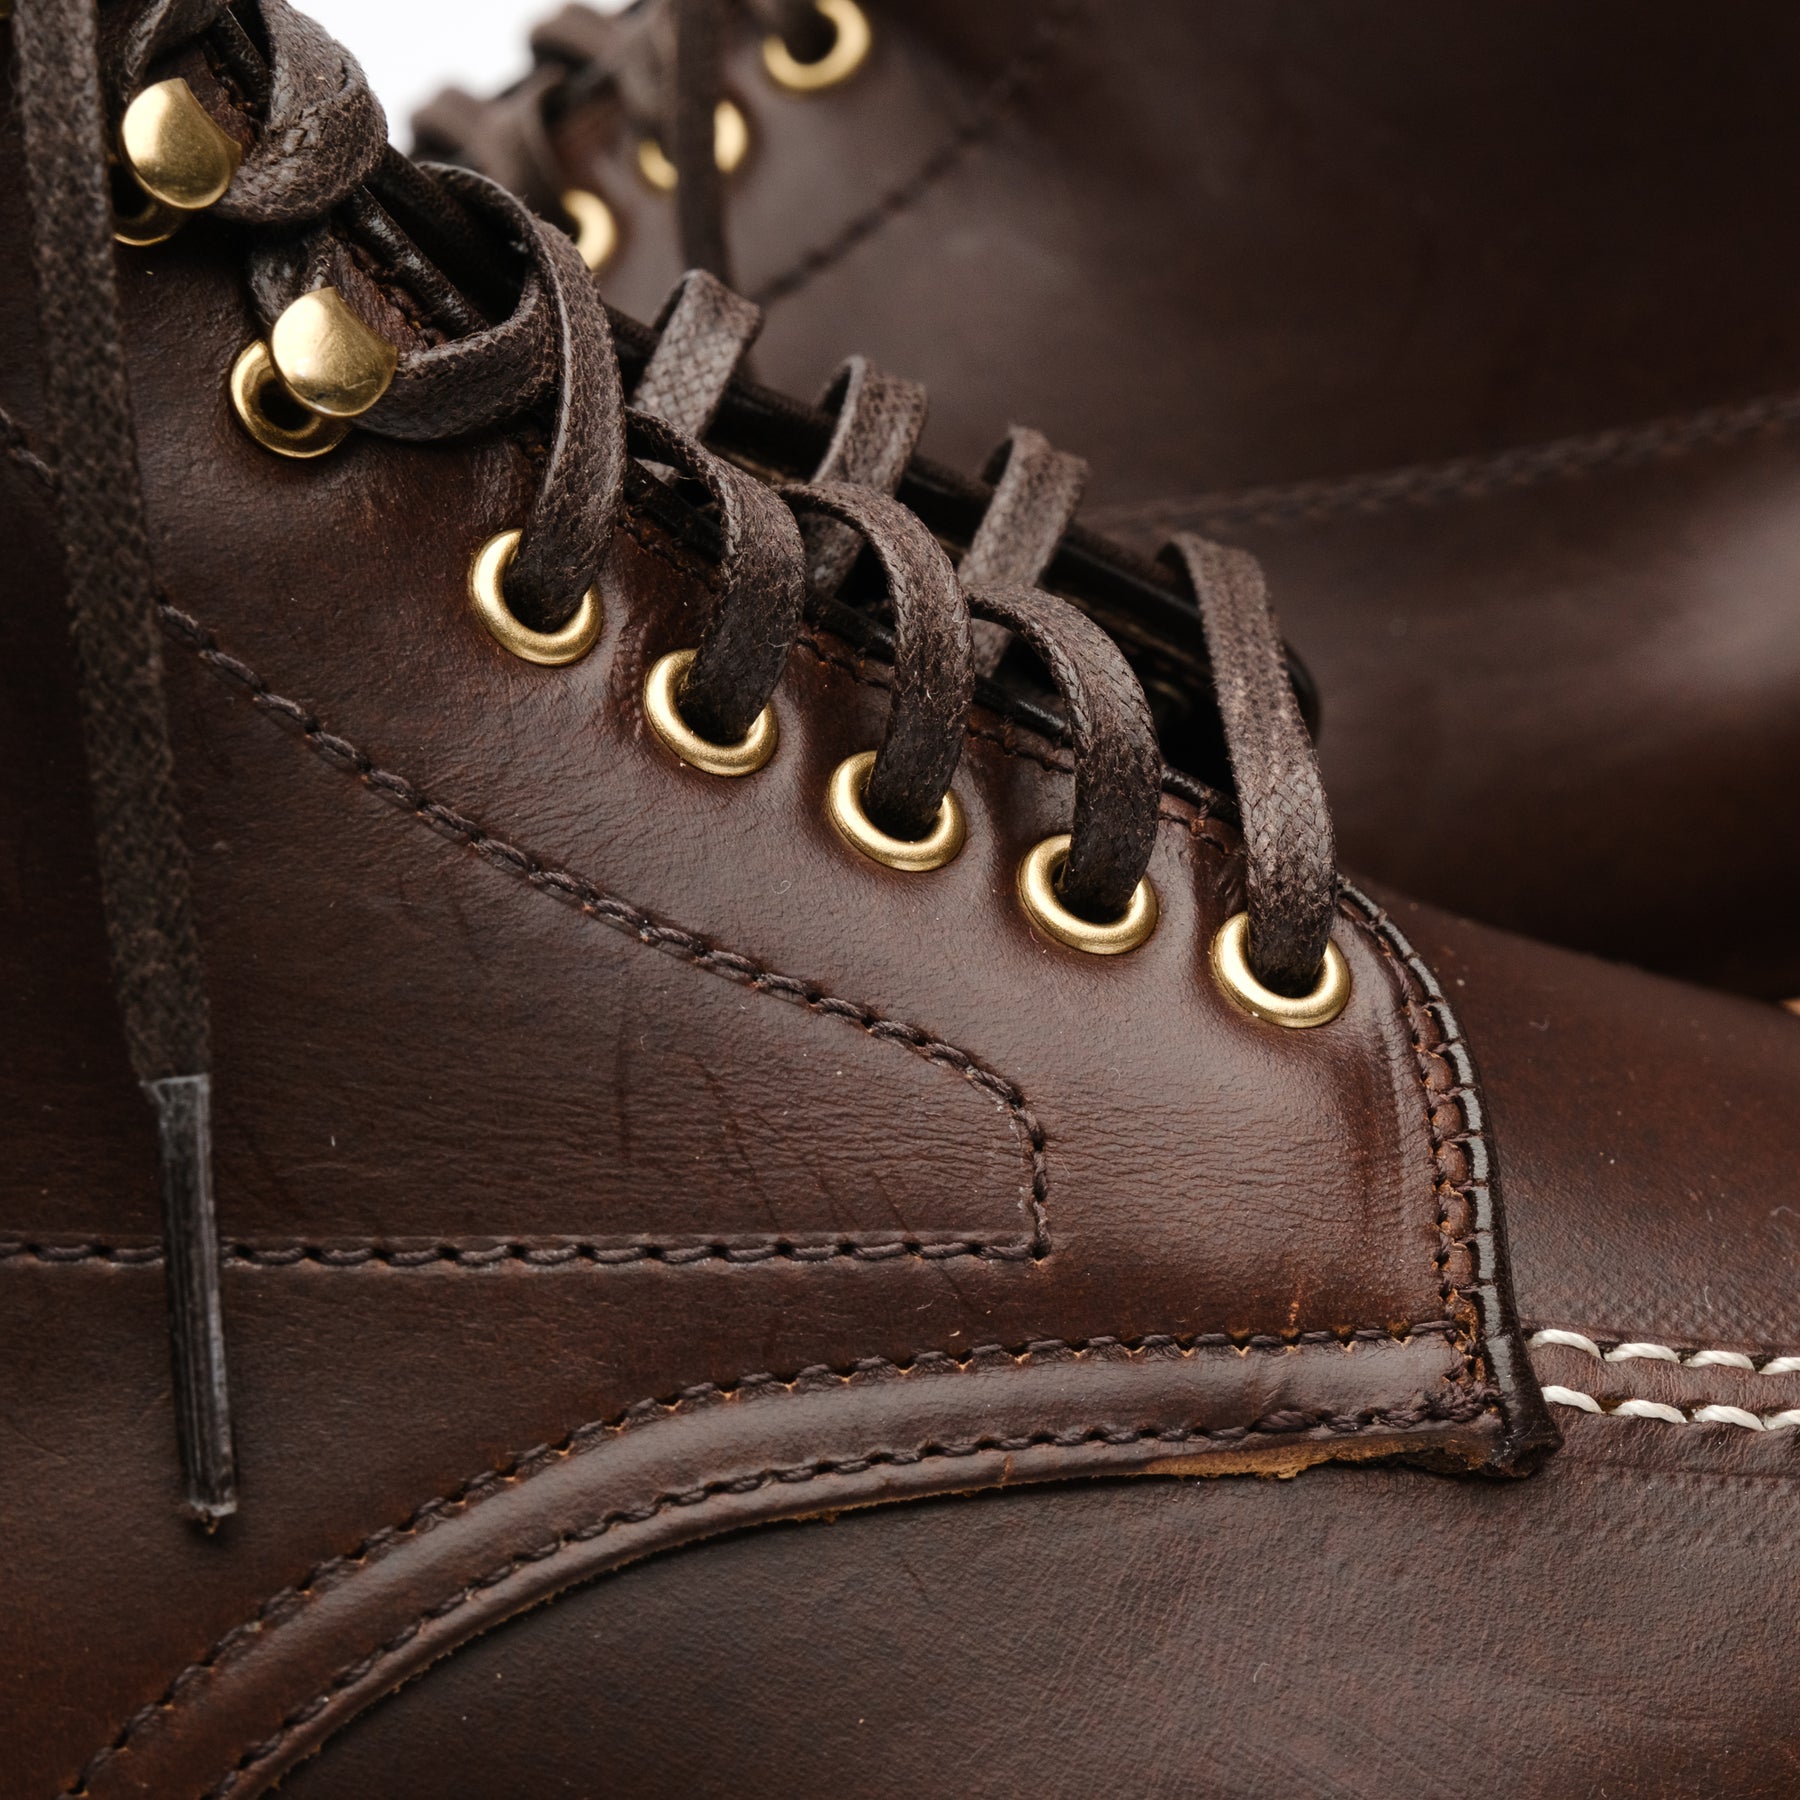 Alden 403B Indy Boot Brown Aniline Pull Up